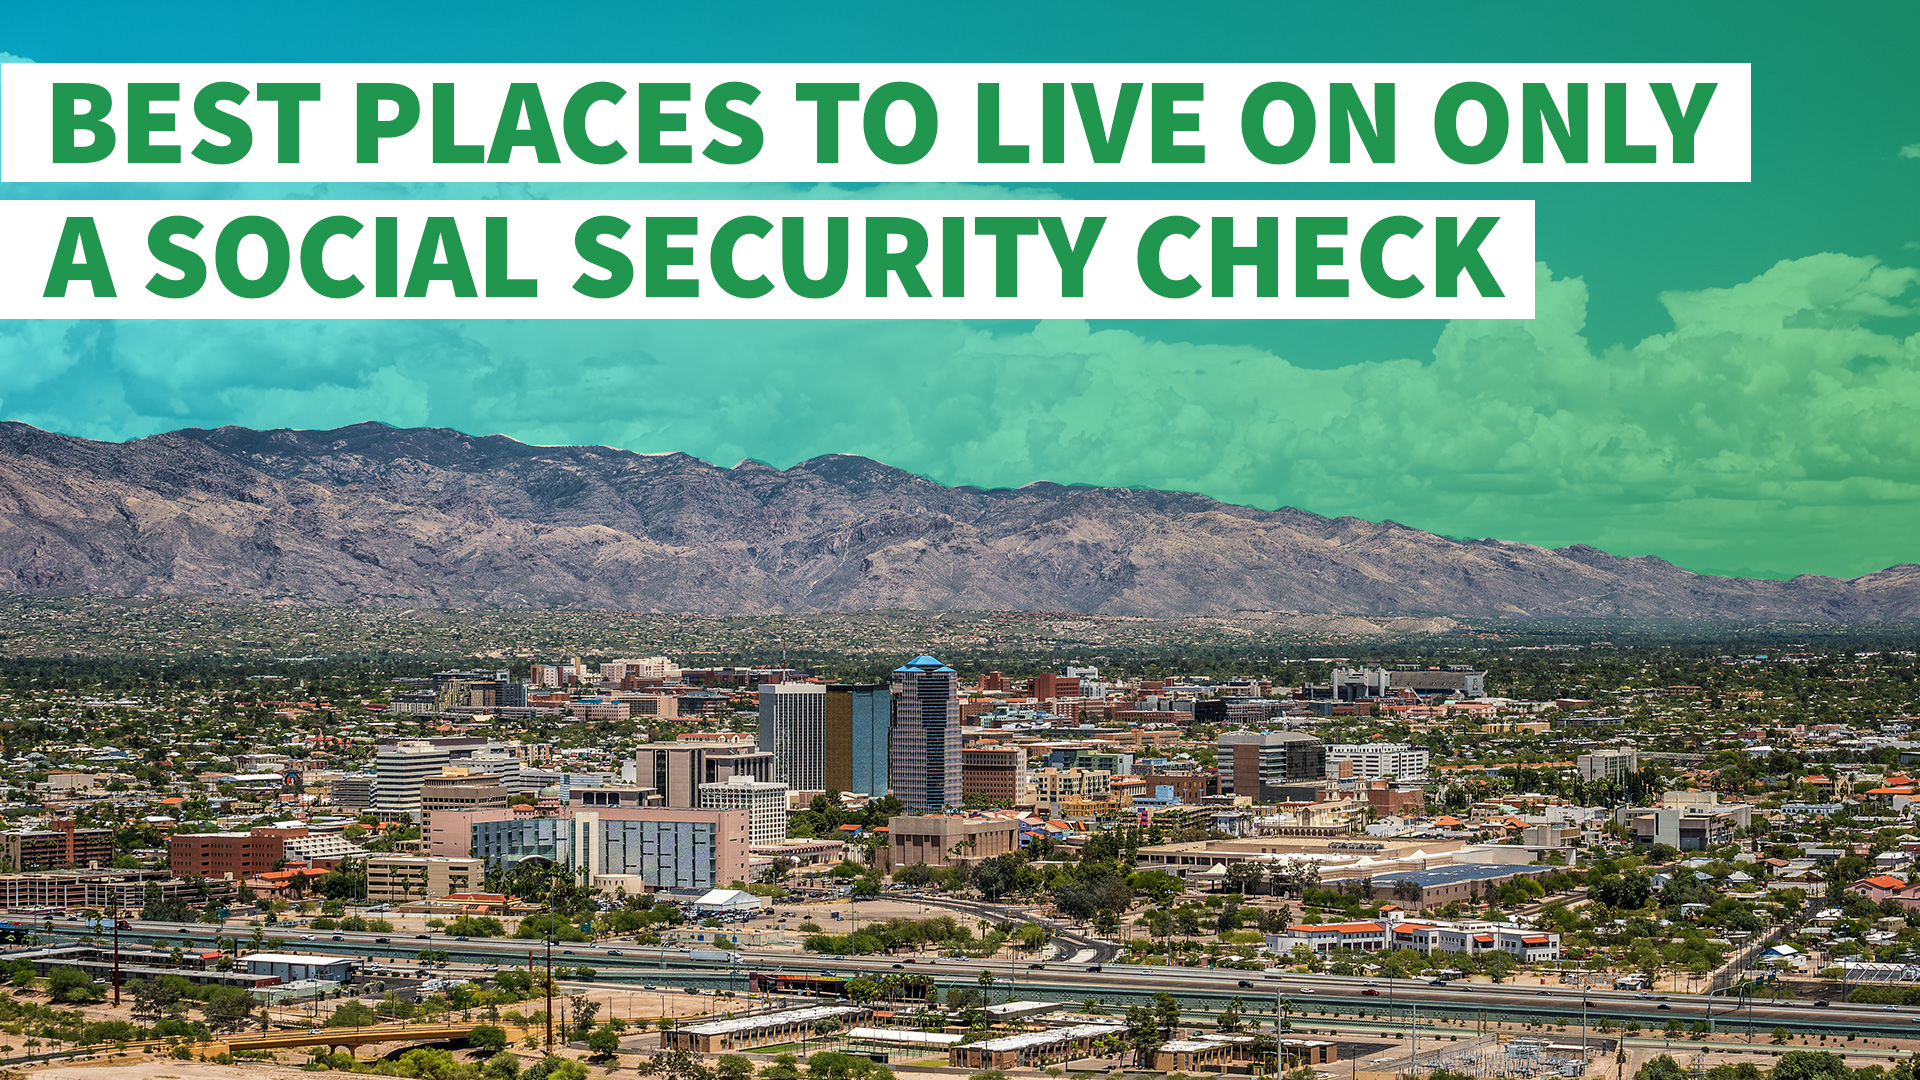 Best Places to Live on Only a Social Security Check | GOBankingRates